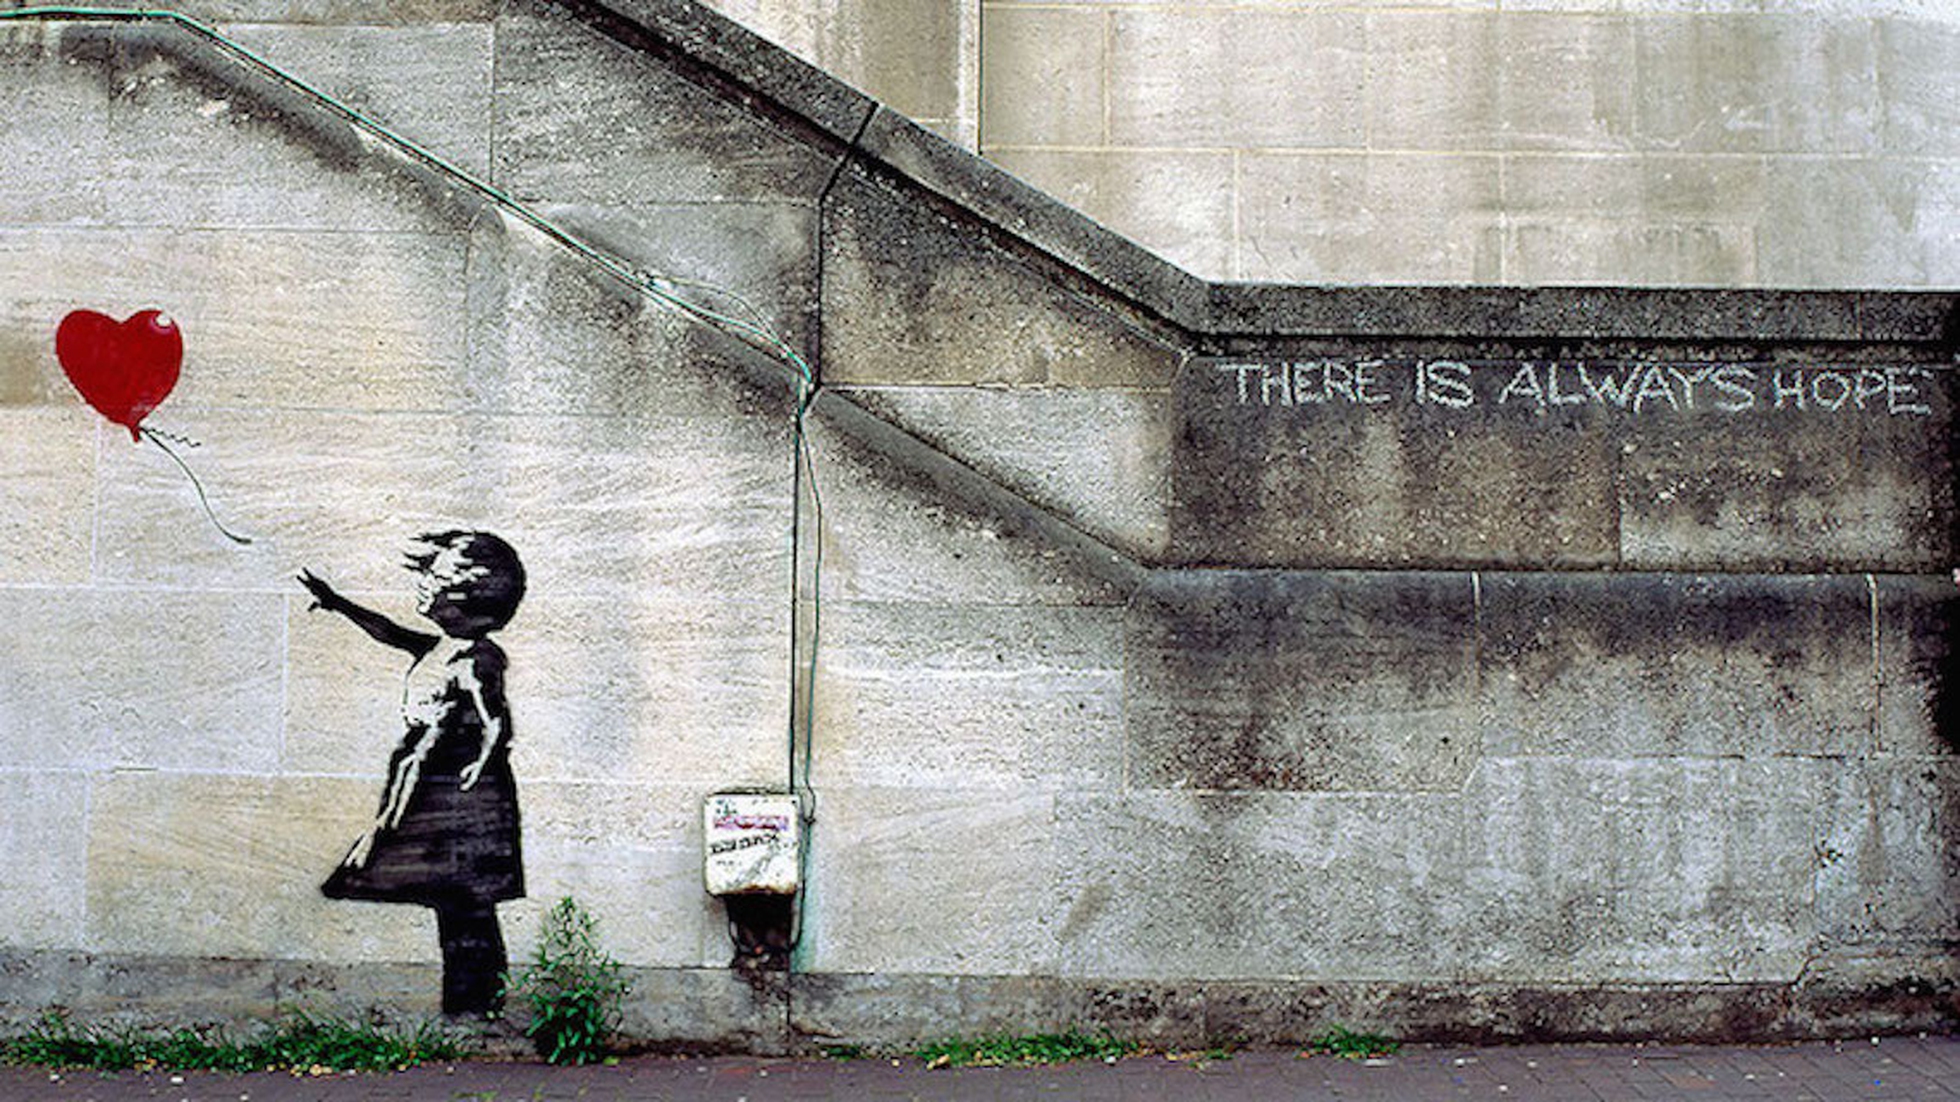 I Can't Believe You Morons Actually Buy This Shit, 2007 - Banksy